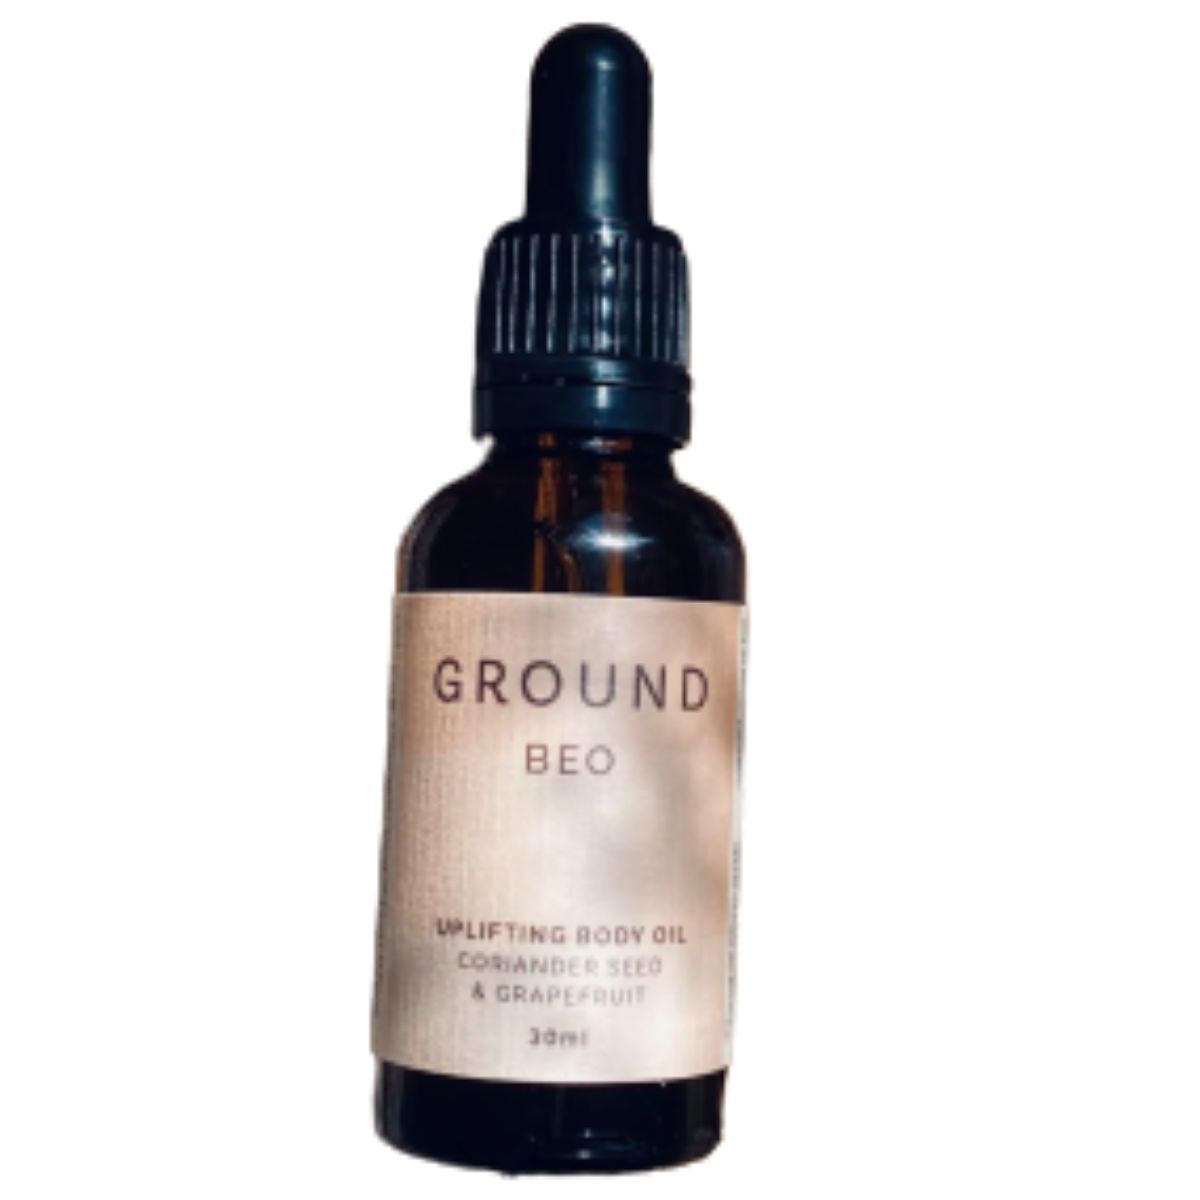 GROUND BEO Uplifting Body Oil Travel Size